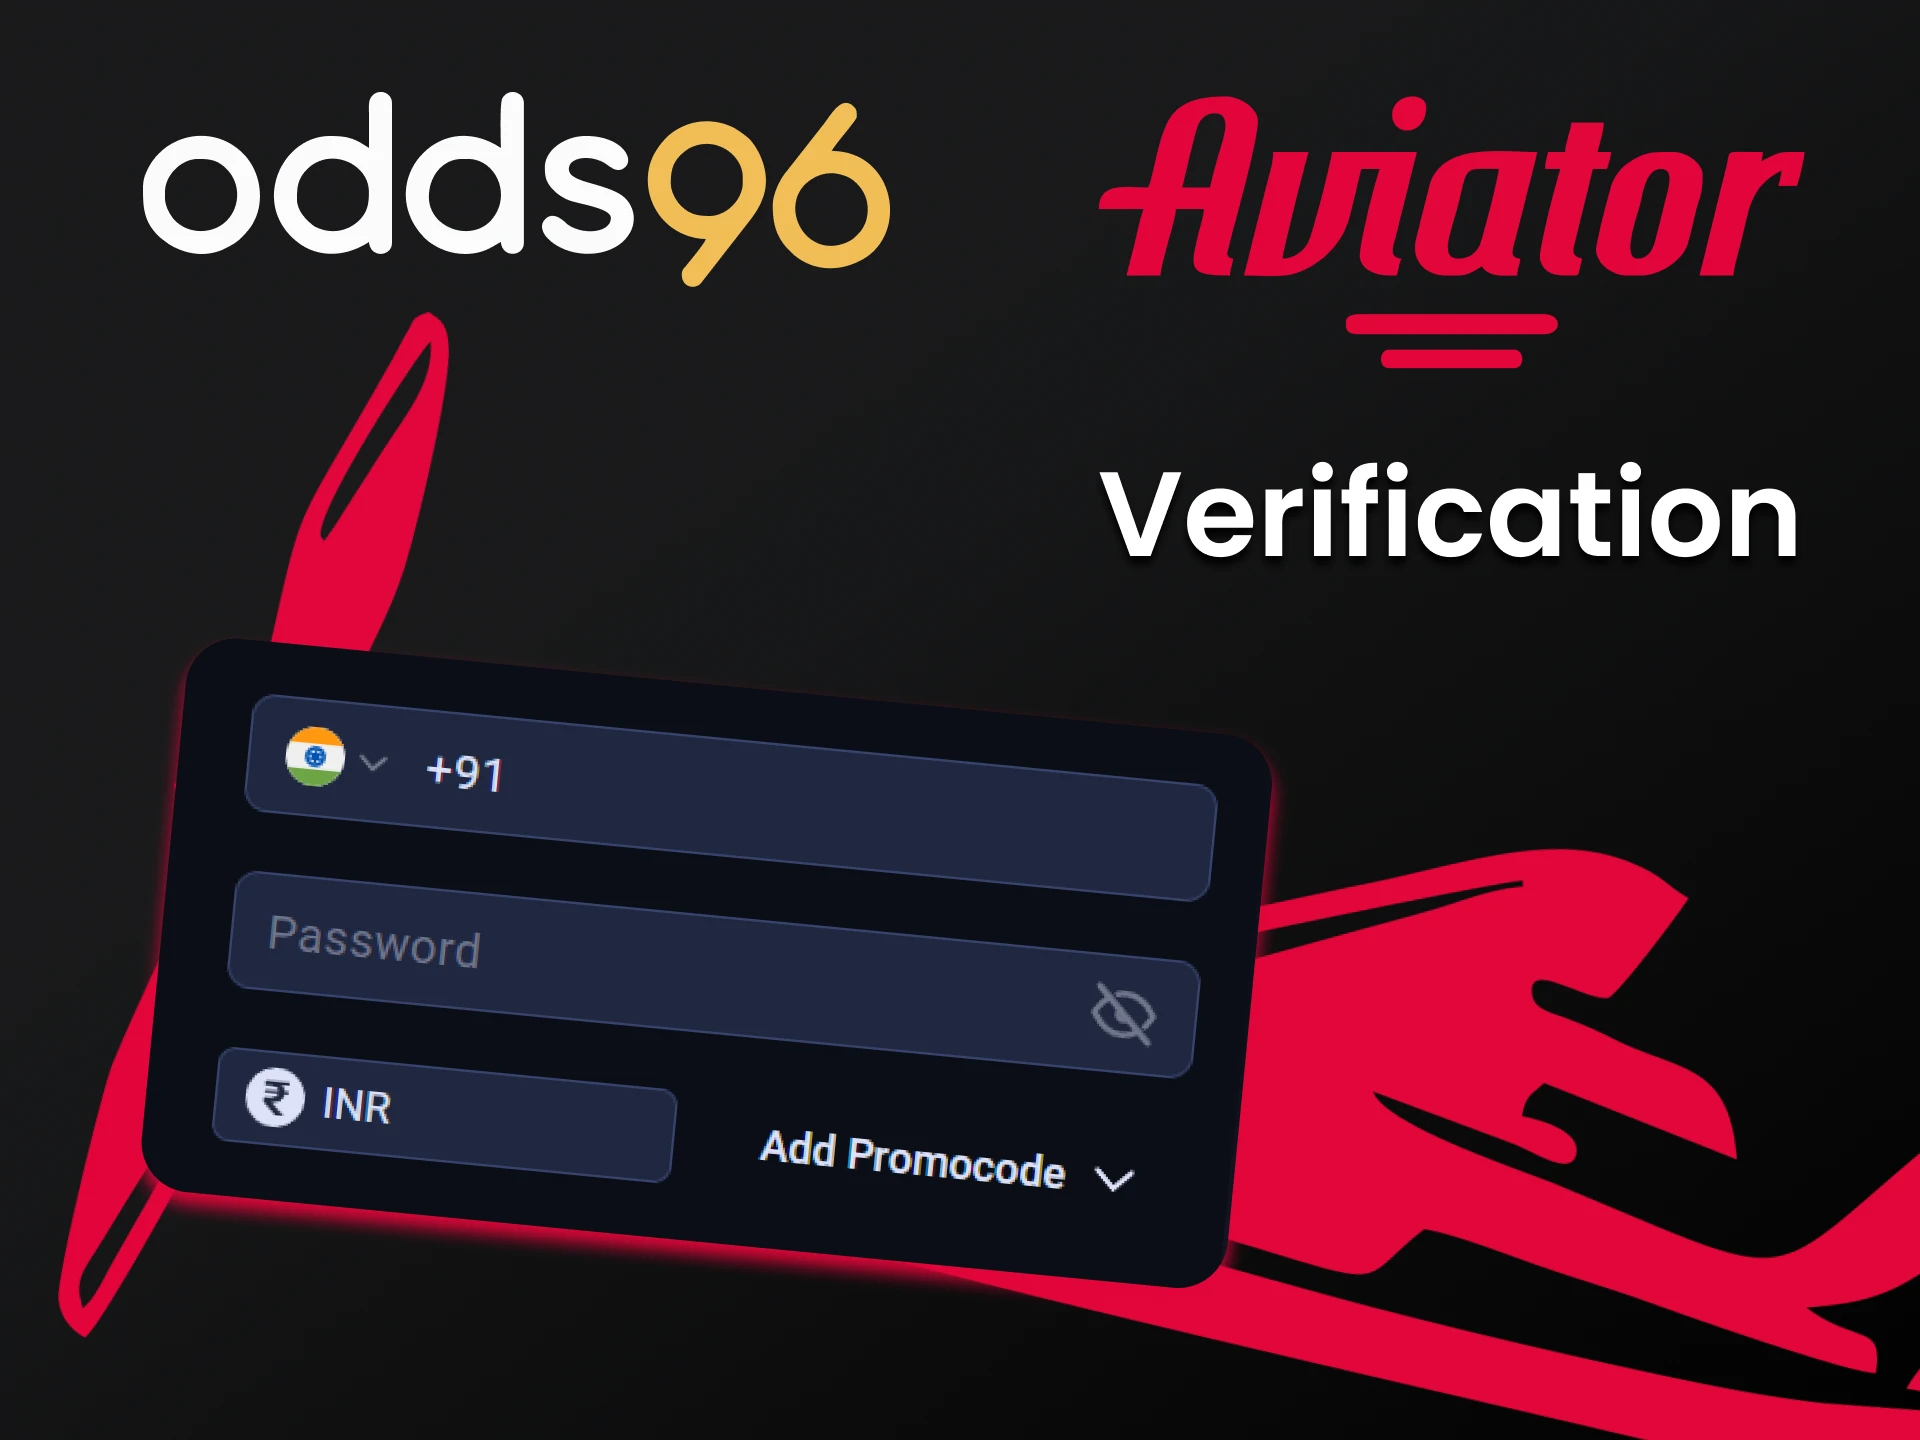 Fill in your personal details on the Odds96 website to play Aviator.